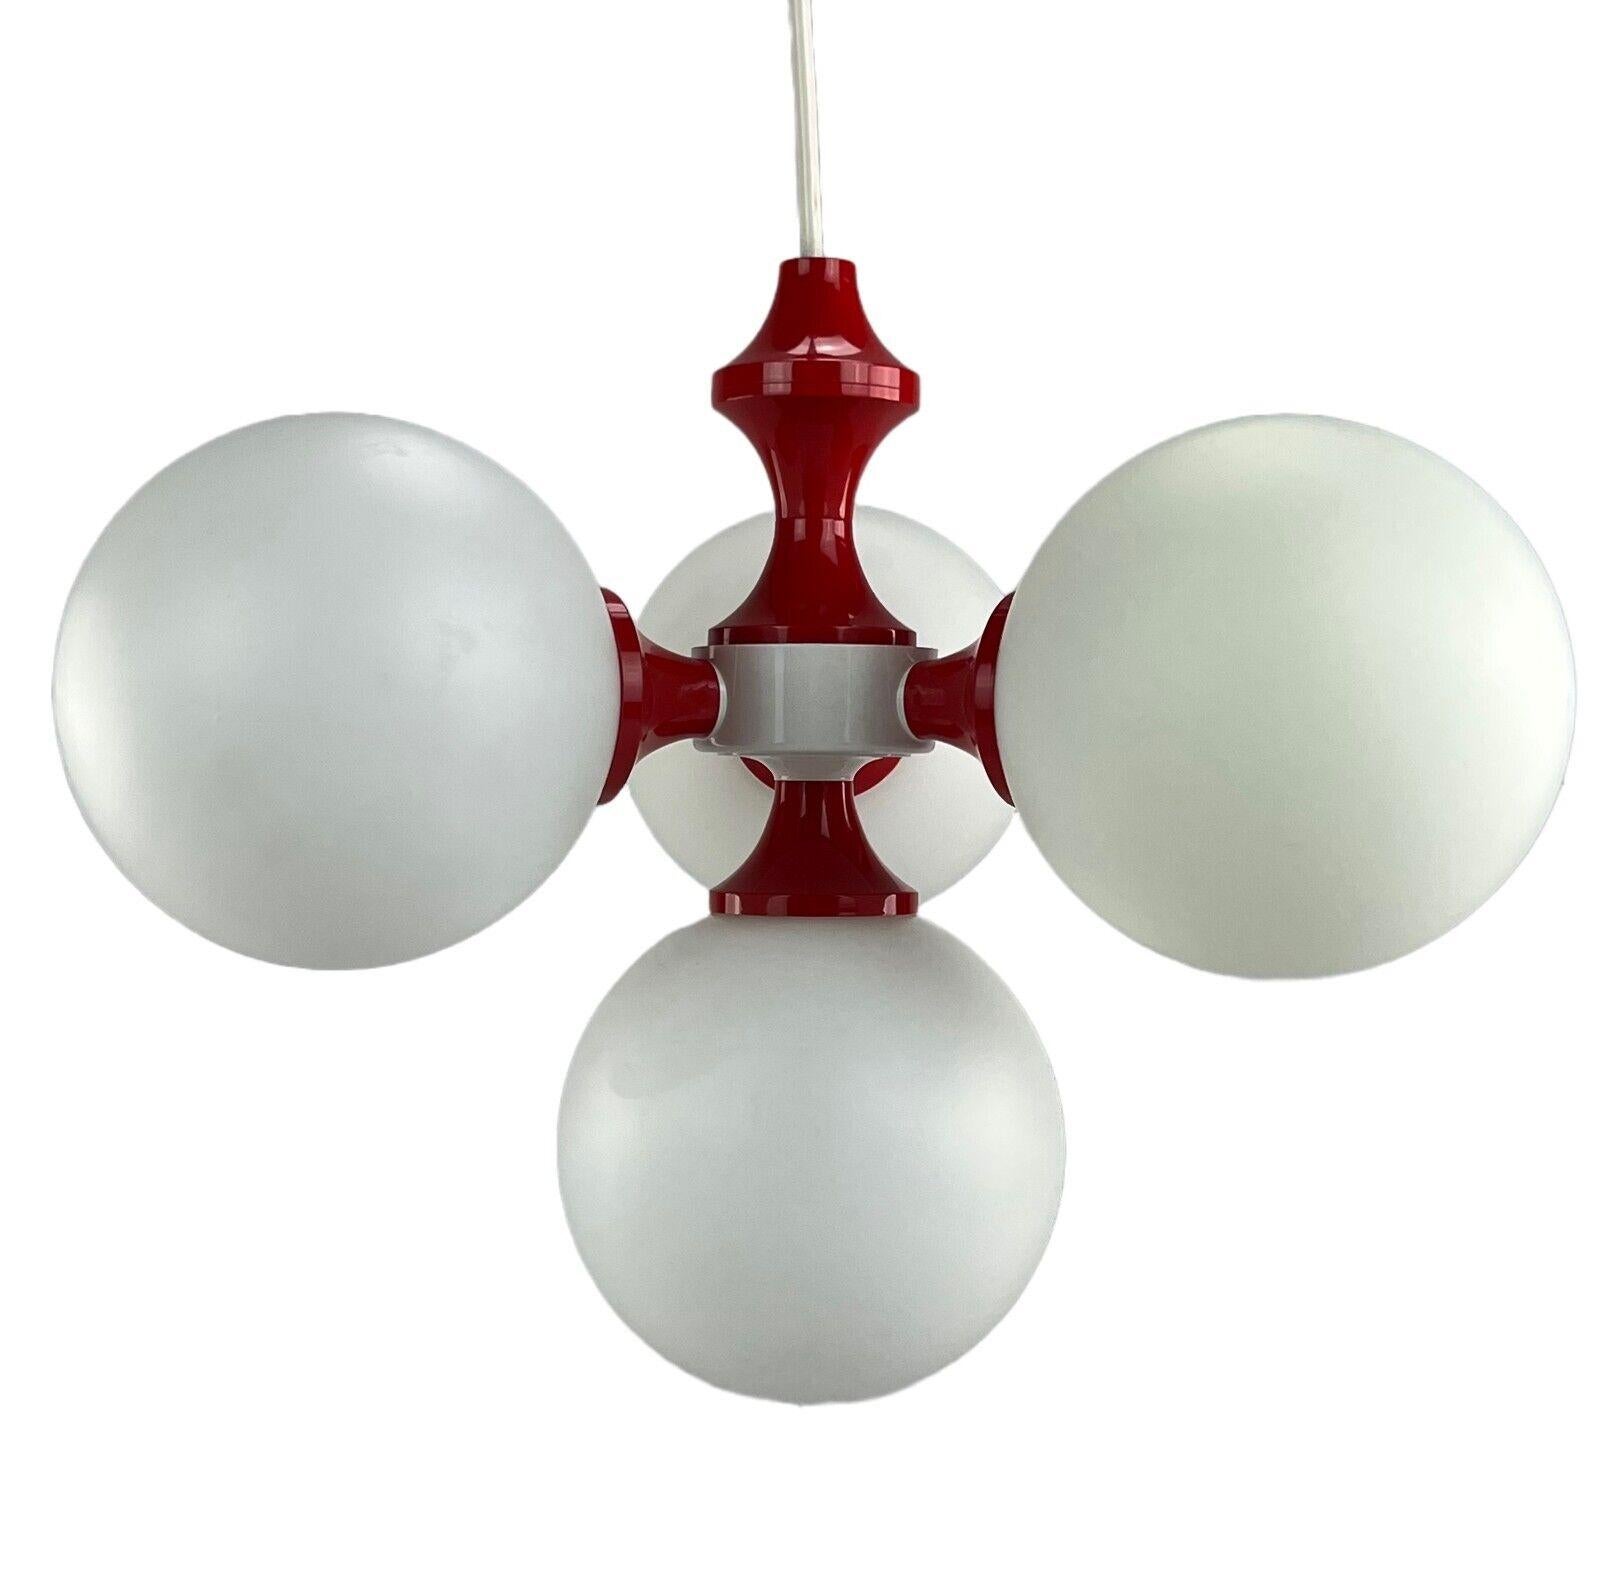 60s 70s Lamp ceiling lamp spherical lamp Richard Essig Space Age

Object: ball lamp

Manufacturer: Richard Vinegar

Condition: good - vintage

Age: around 1960-1970

Dimensions:

Diameter = 38cm
Height = 30cm

Other notes:

The